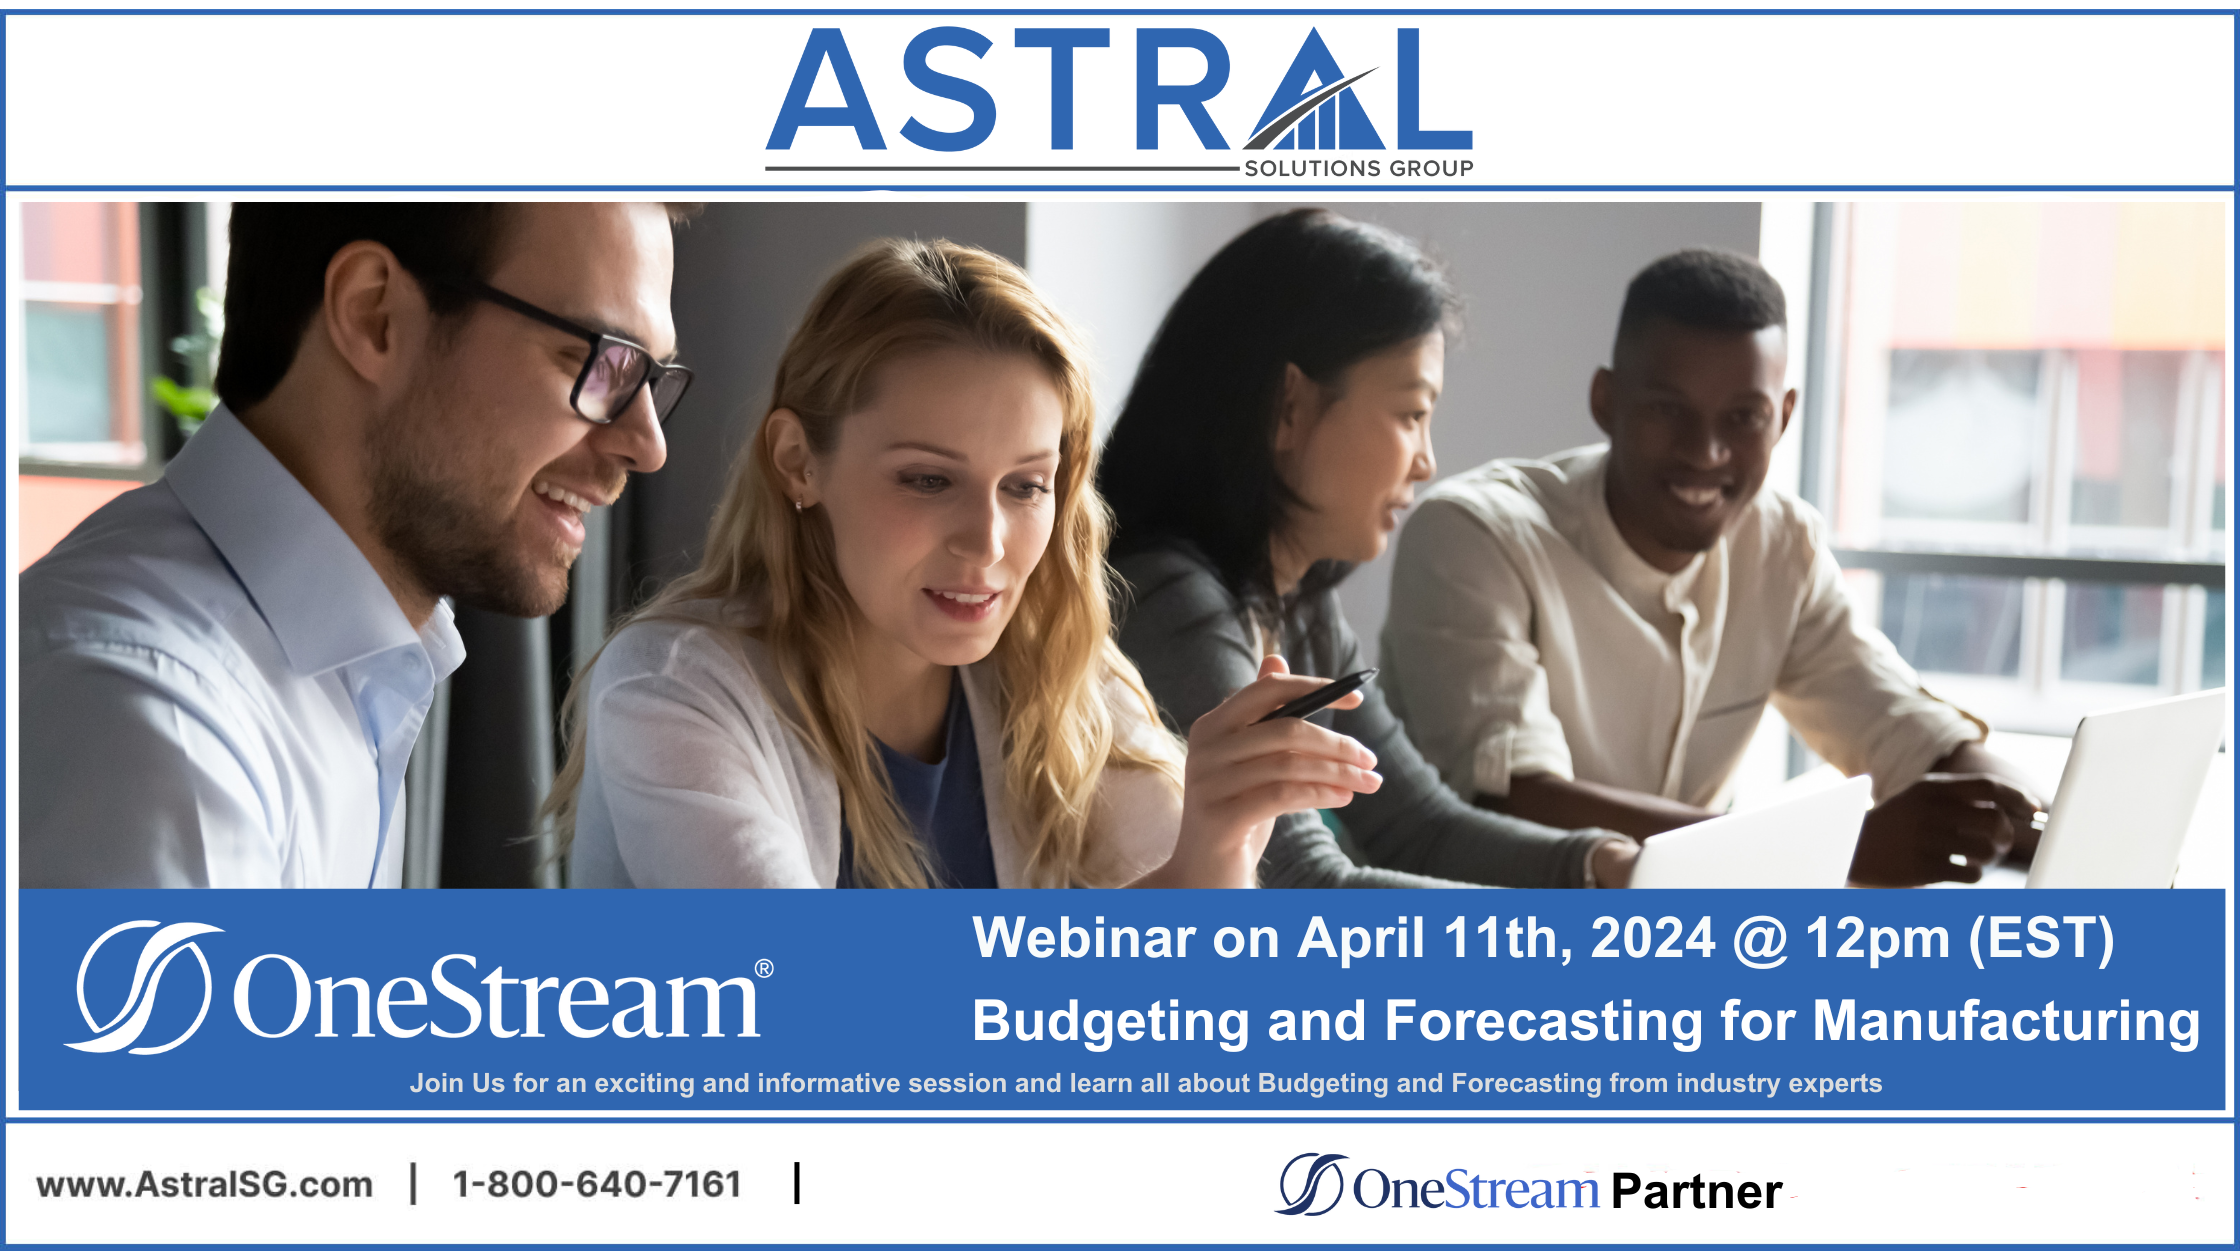 Join Astral Solutions Group & OneStream Software for a FREE Webinar